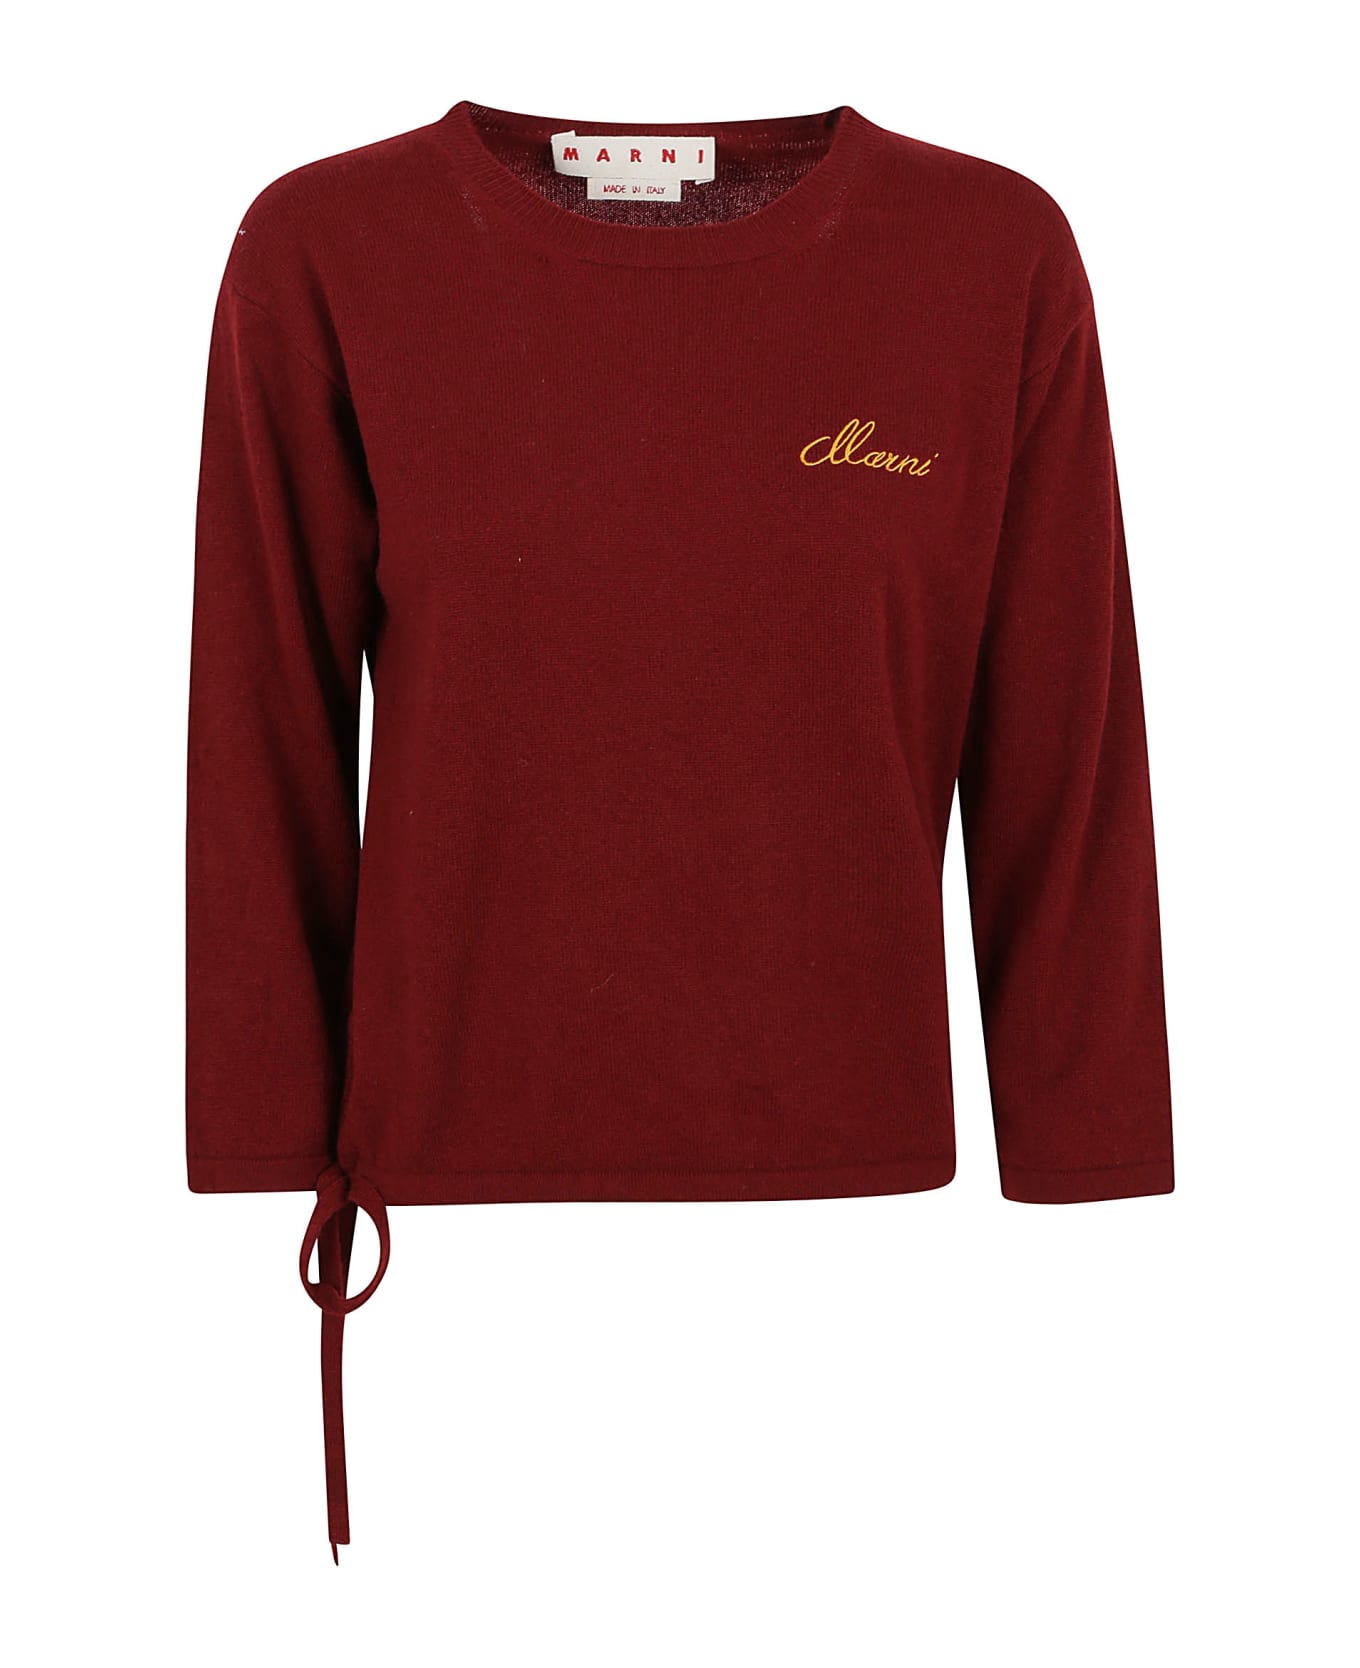 Marni Roundneck Sweater - RED